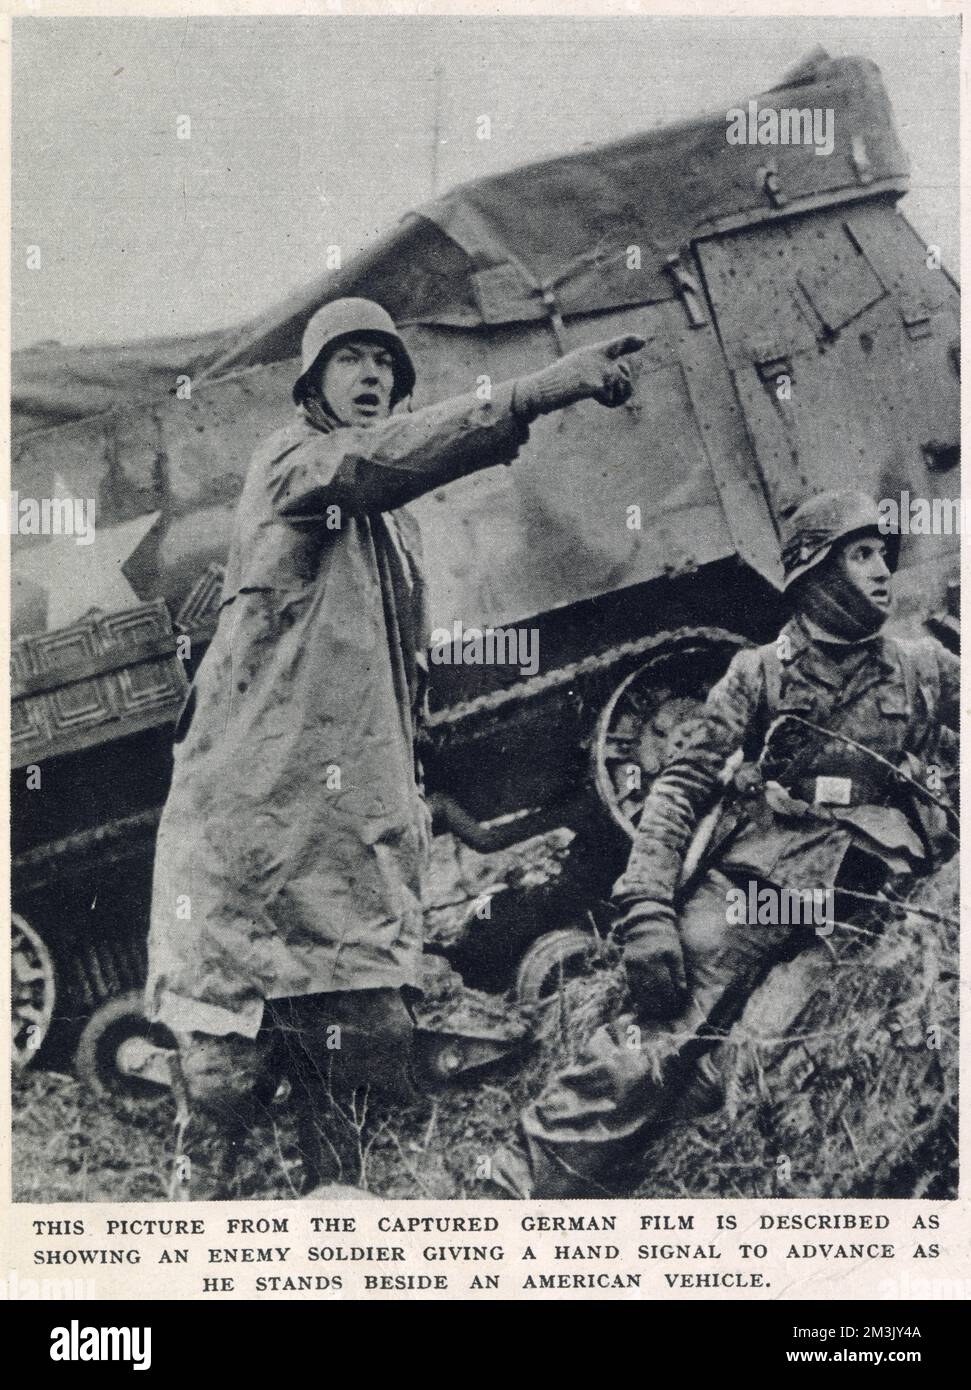 German soldier signalling to his comrades during the early stages of the 'Battle of the Bulge', December 1944. Behind is a knocked-out American half-track.  The 'Battle of the Bulge' was the last major Nazi offensive on the Western front during the Second World War and, though initially successful, resulted in major German losses.  This photograph was taken by a German film unit during the German offensive. The film was then captured during the Allied counter-offensive.     Date: 1944 Stock Photo